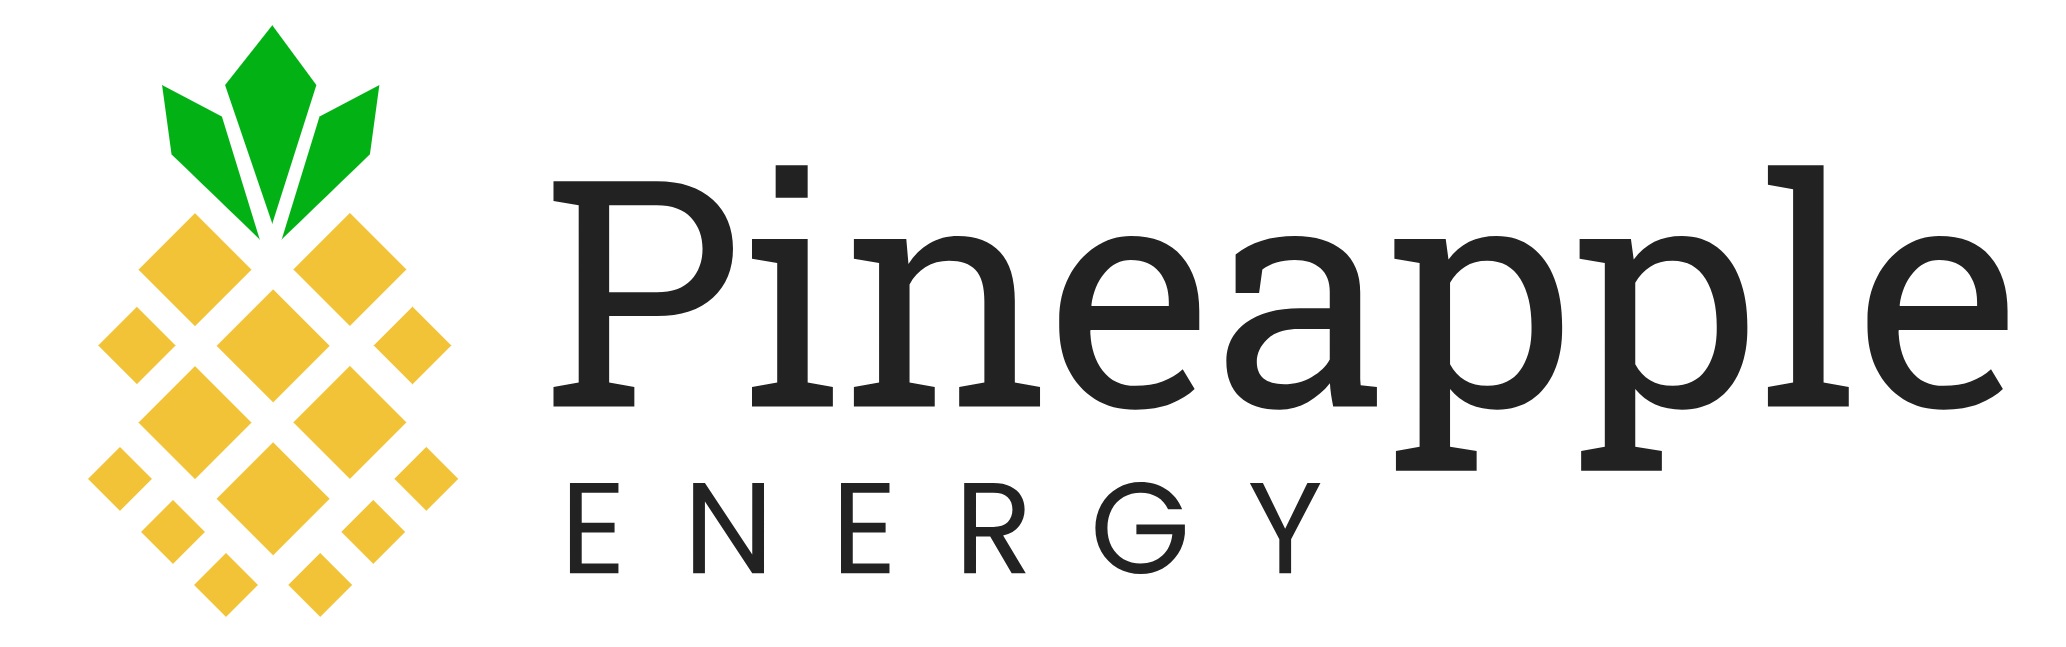 Pineapple Energy Formalizes Agreement With Conduit Capital for Services and to Pursue Working Capital Investment - GlobeNewswire